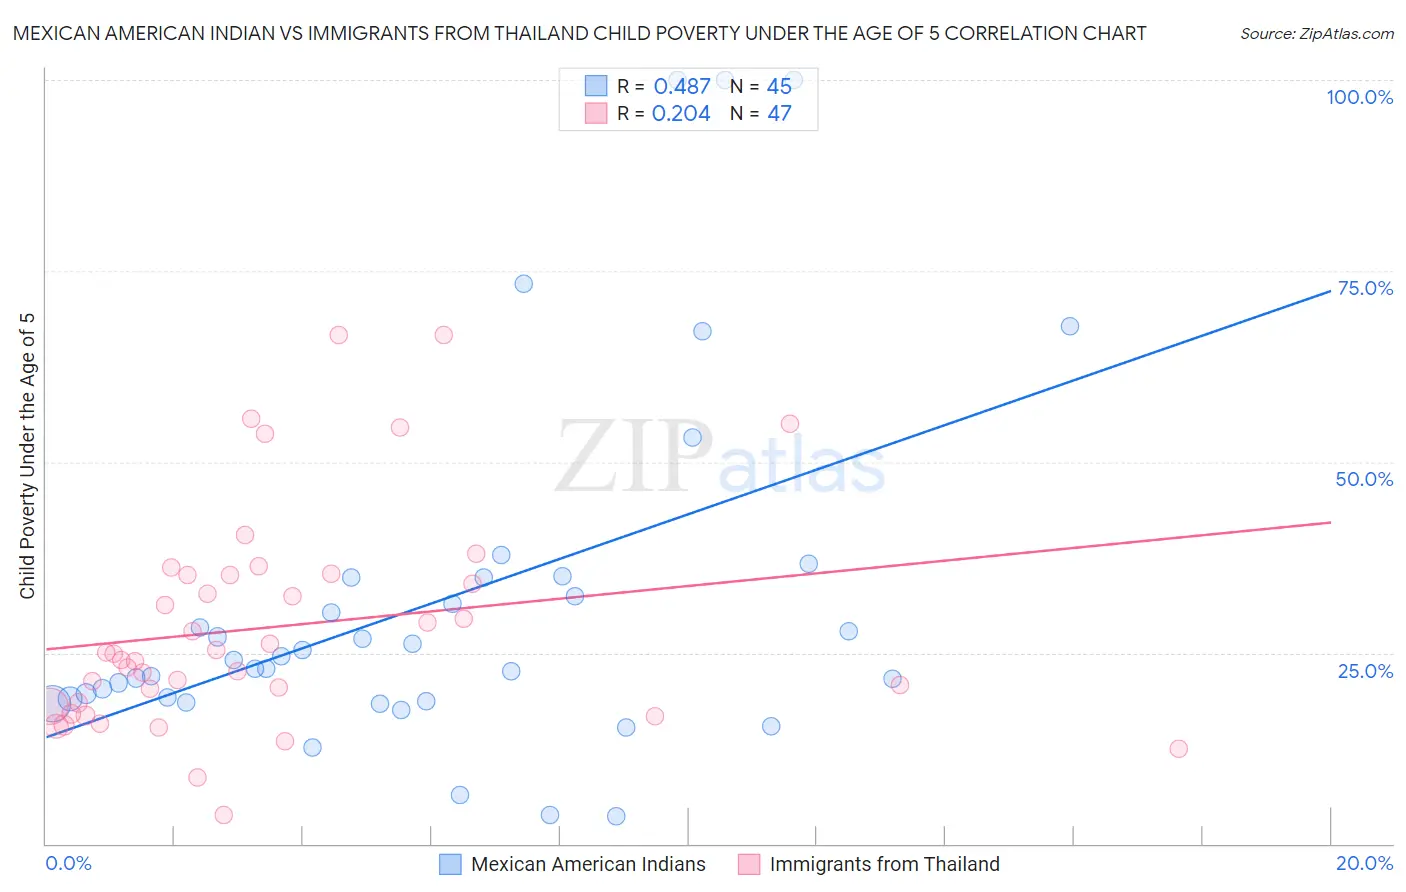 Mexican American Indian vs Immigrants from Thailand Child Poverty Under the Age of 5